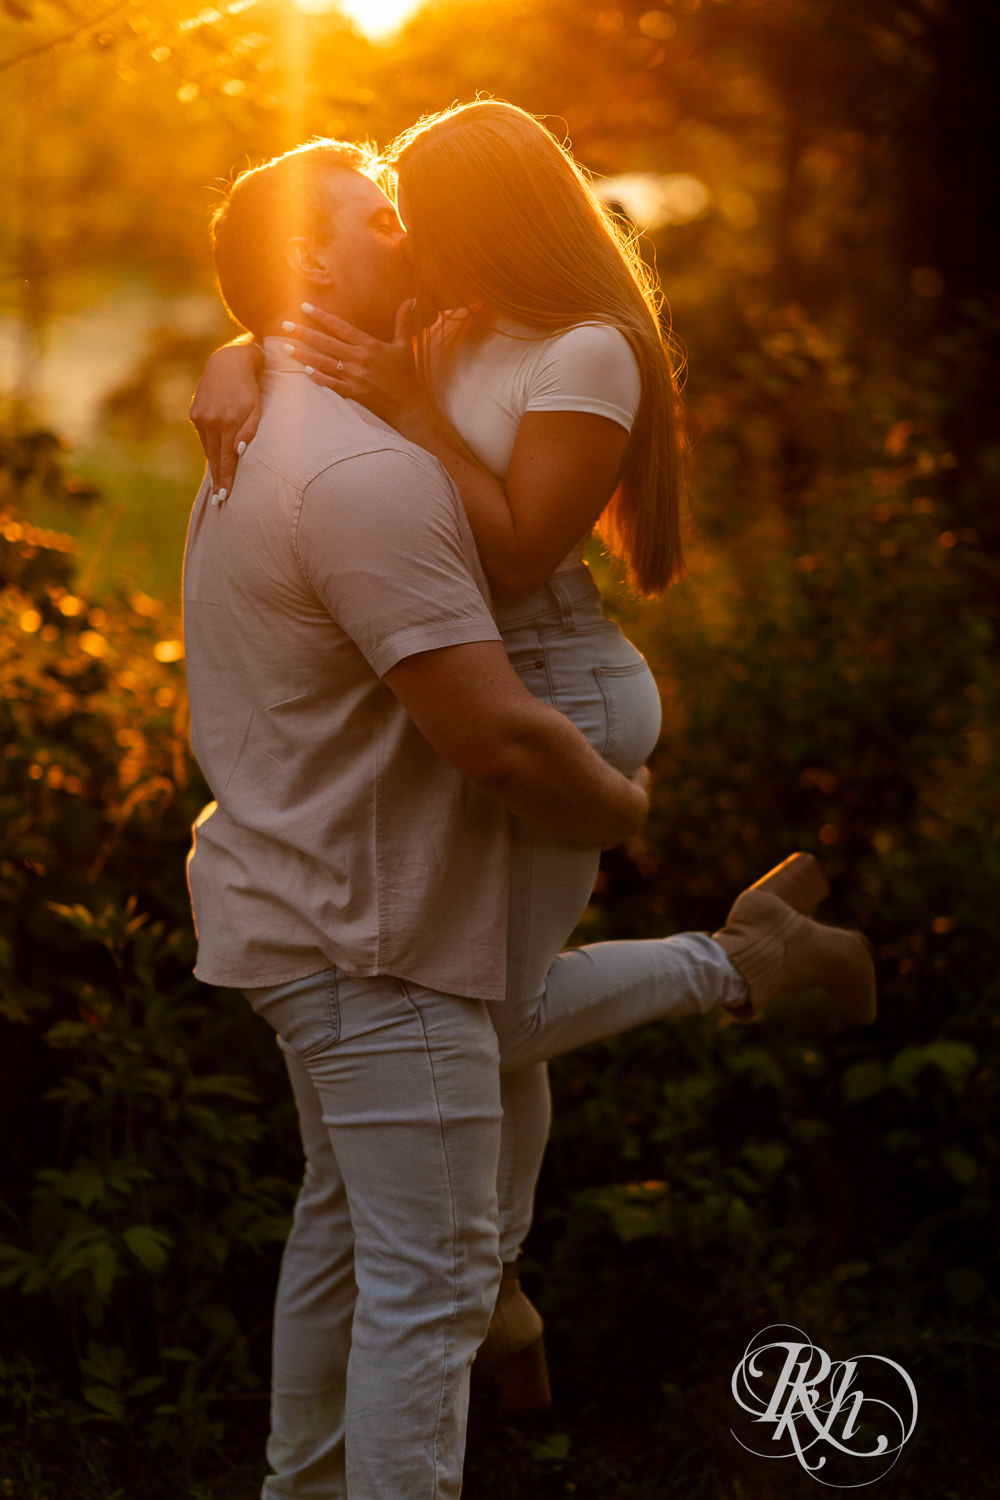 Man and woman in jeans kiss in field during golden hour engagement photography in Eagan, Minnesota.